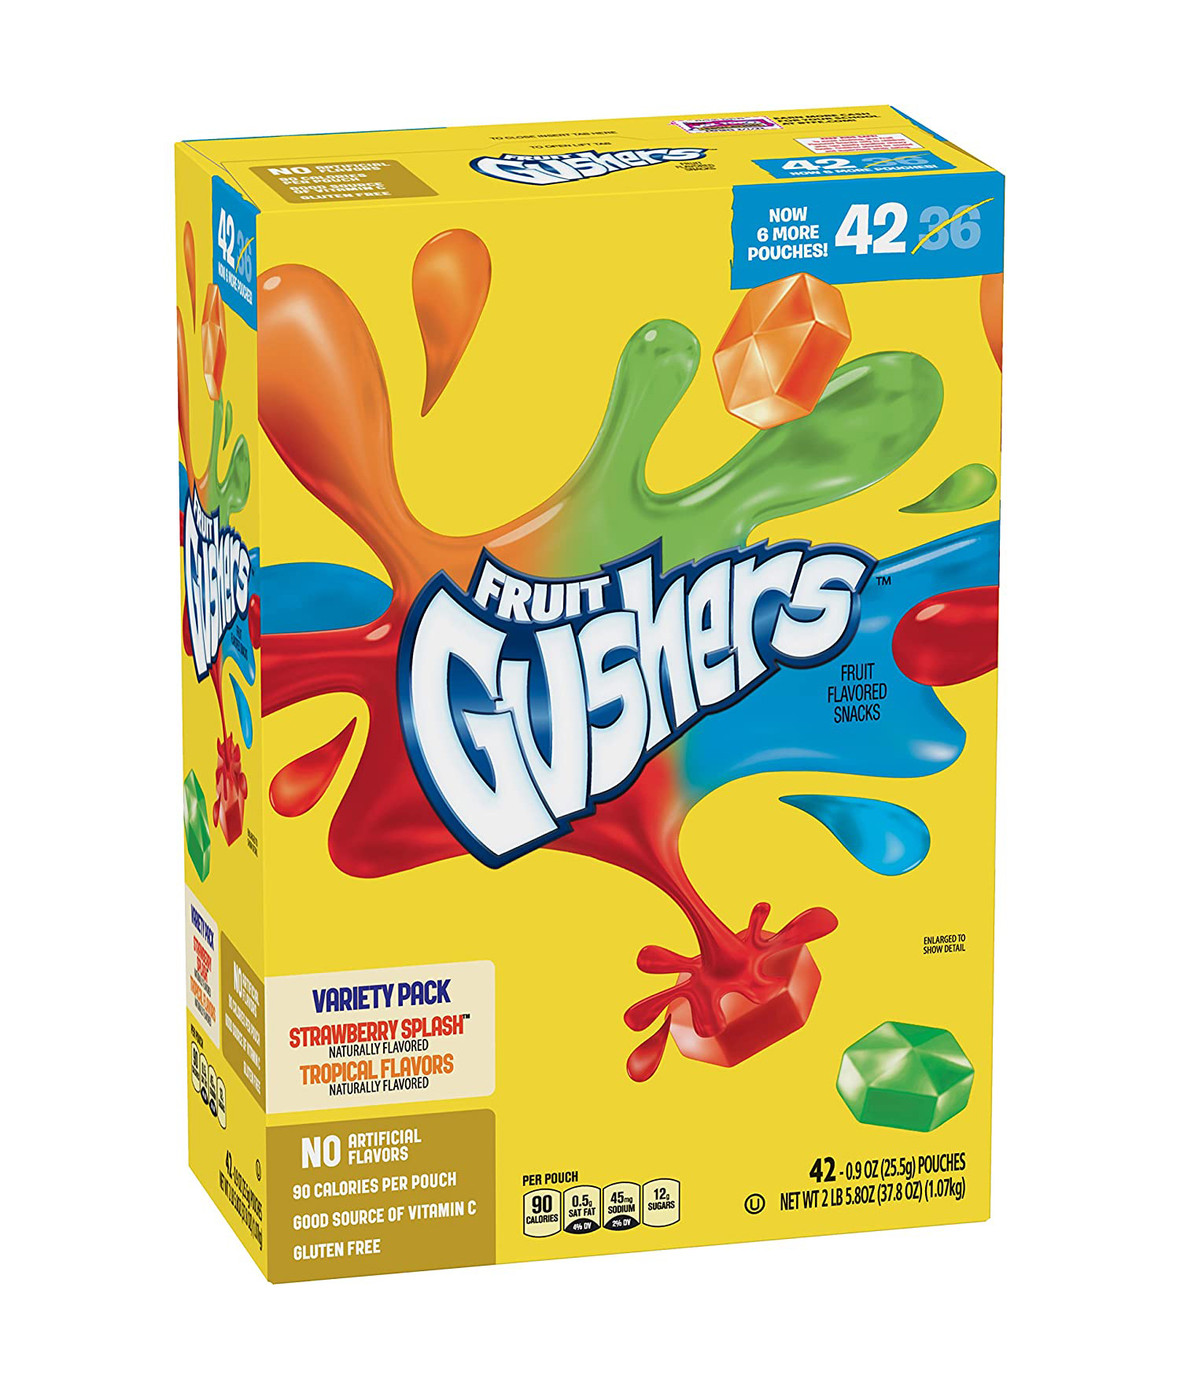 Betty Crocker Fruit Gushers Fruit Snacks, Strawberry And Tropical Fruit Flavors